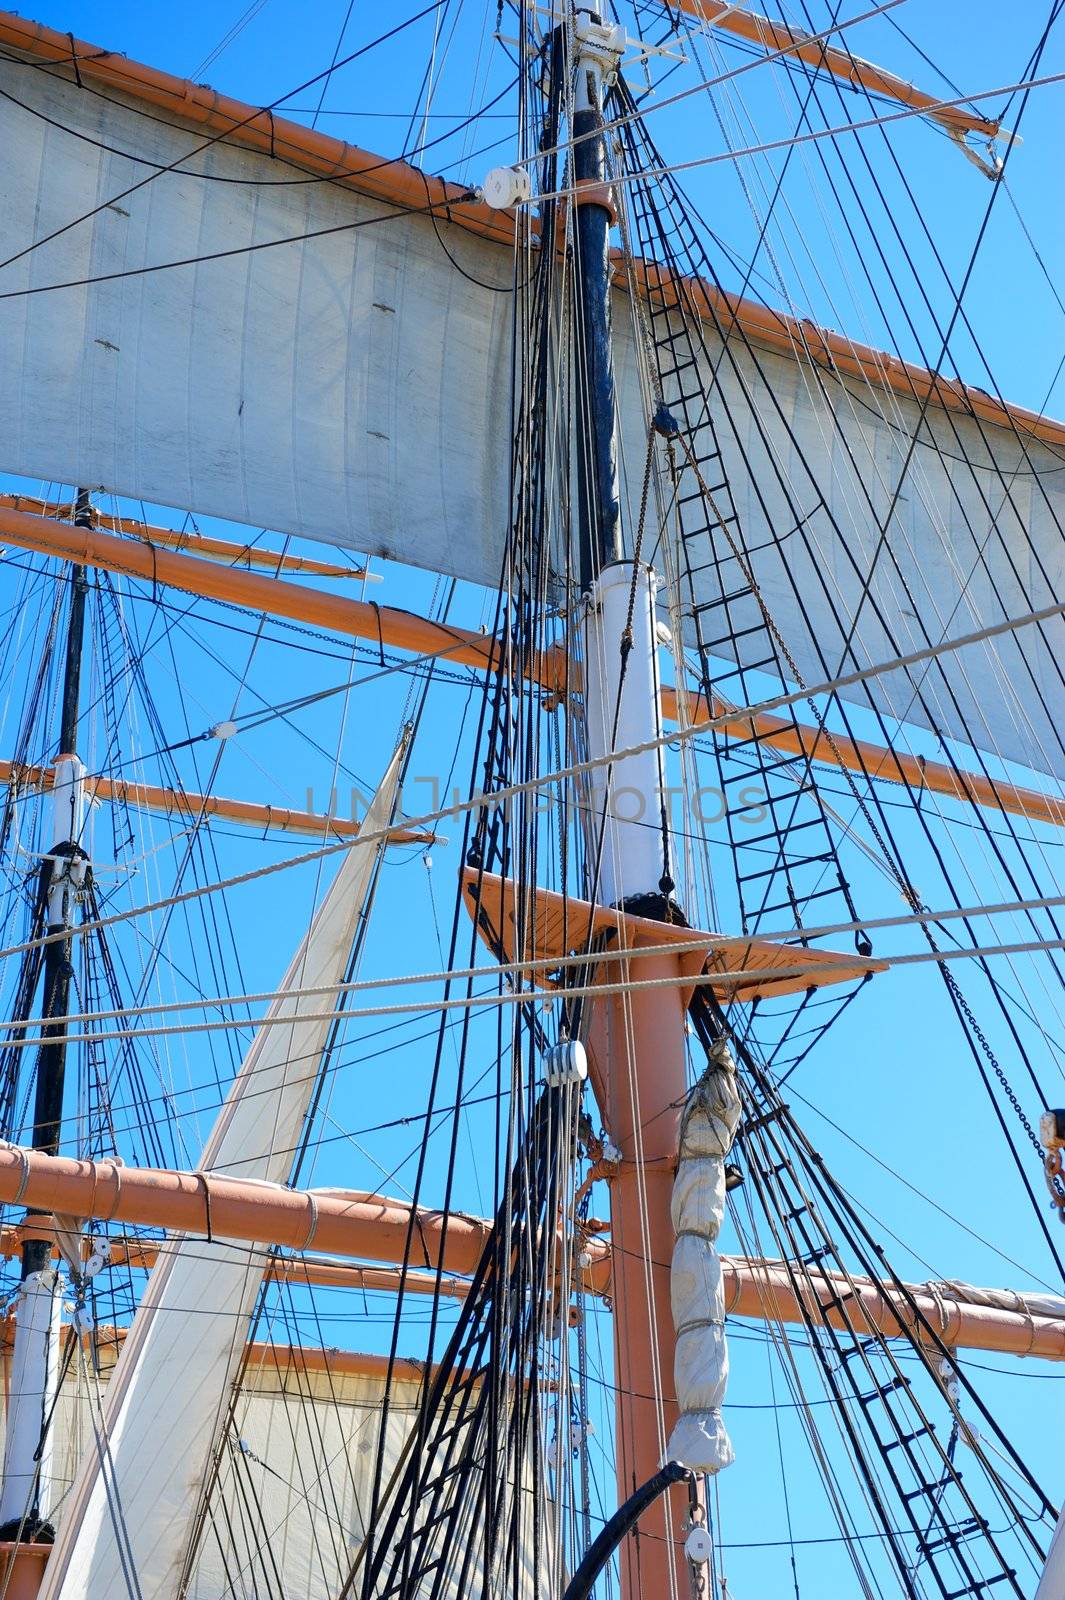 The Sails and Rigging of An Old Sailing Ship Shot Against a Clear Blue Sky